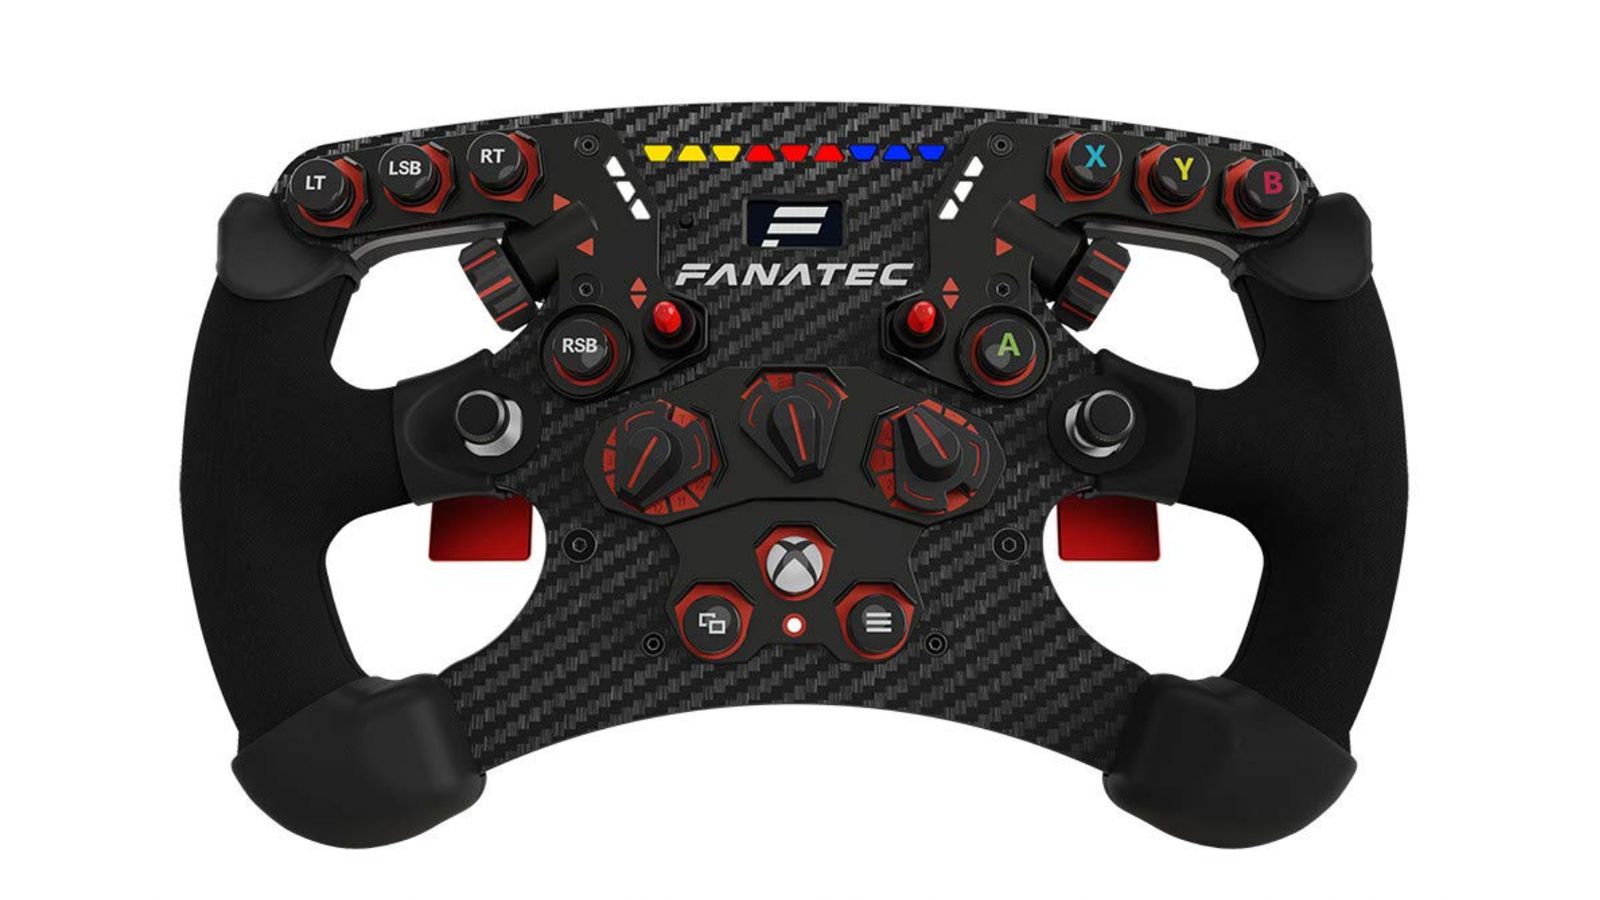 Fanatec ClubSport Steering Wheel Formula V2.5 X product image of a black Formula-style racing wheel with orange buttons.